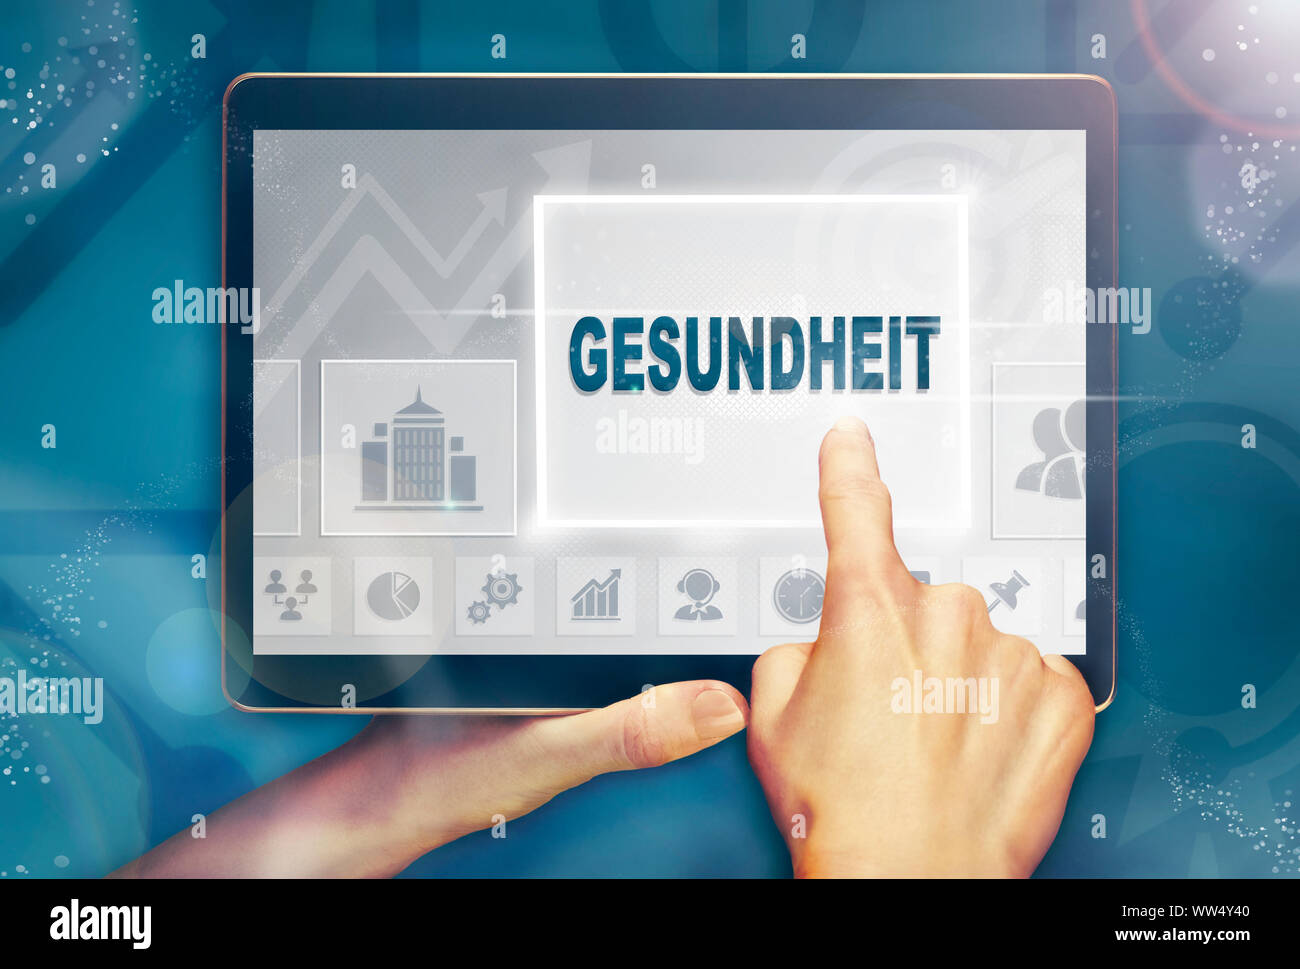 A hand holiding a computer tablet and pressing a Health "Gesundheit" business concept. Stock Photo